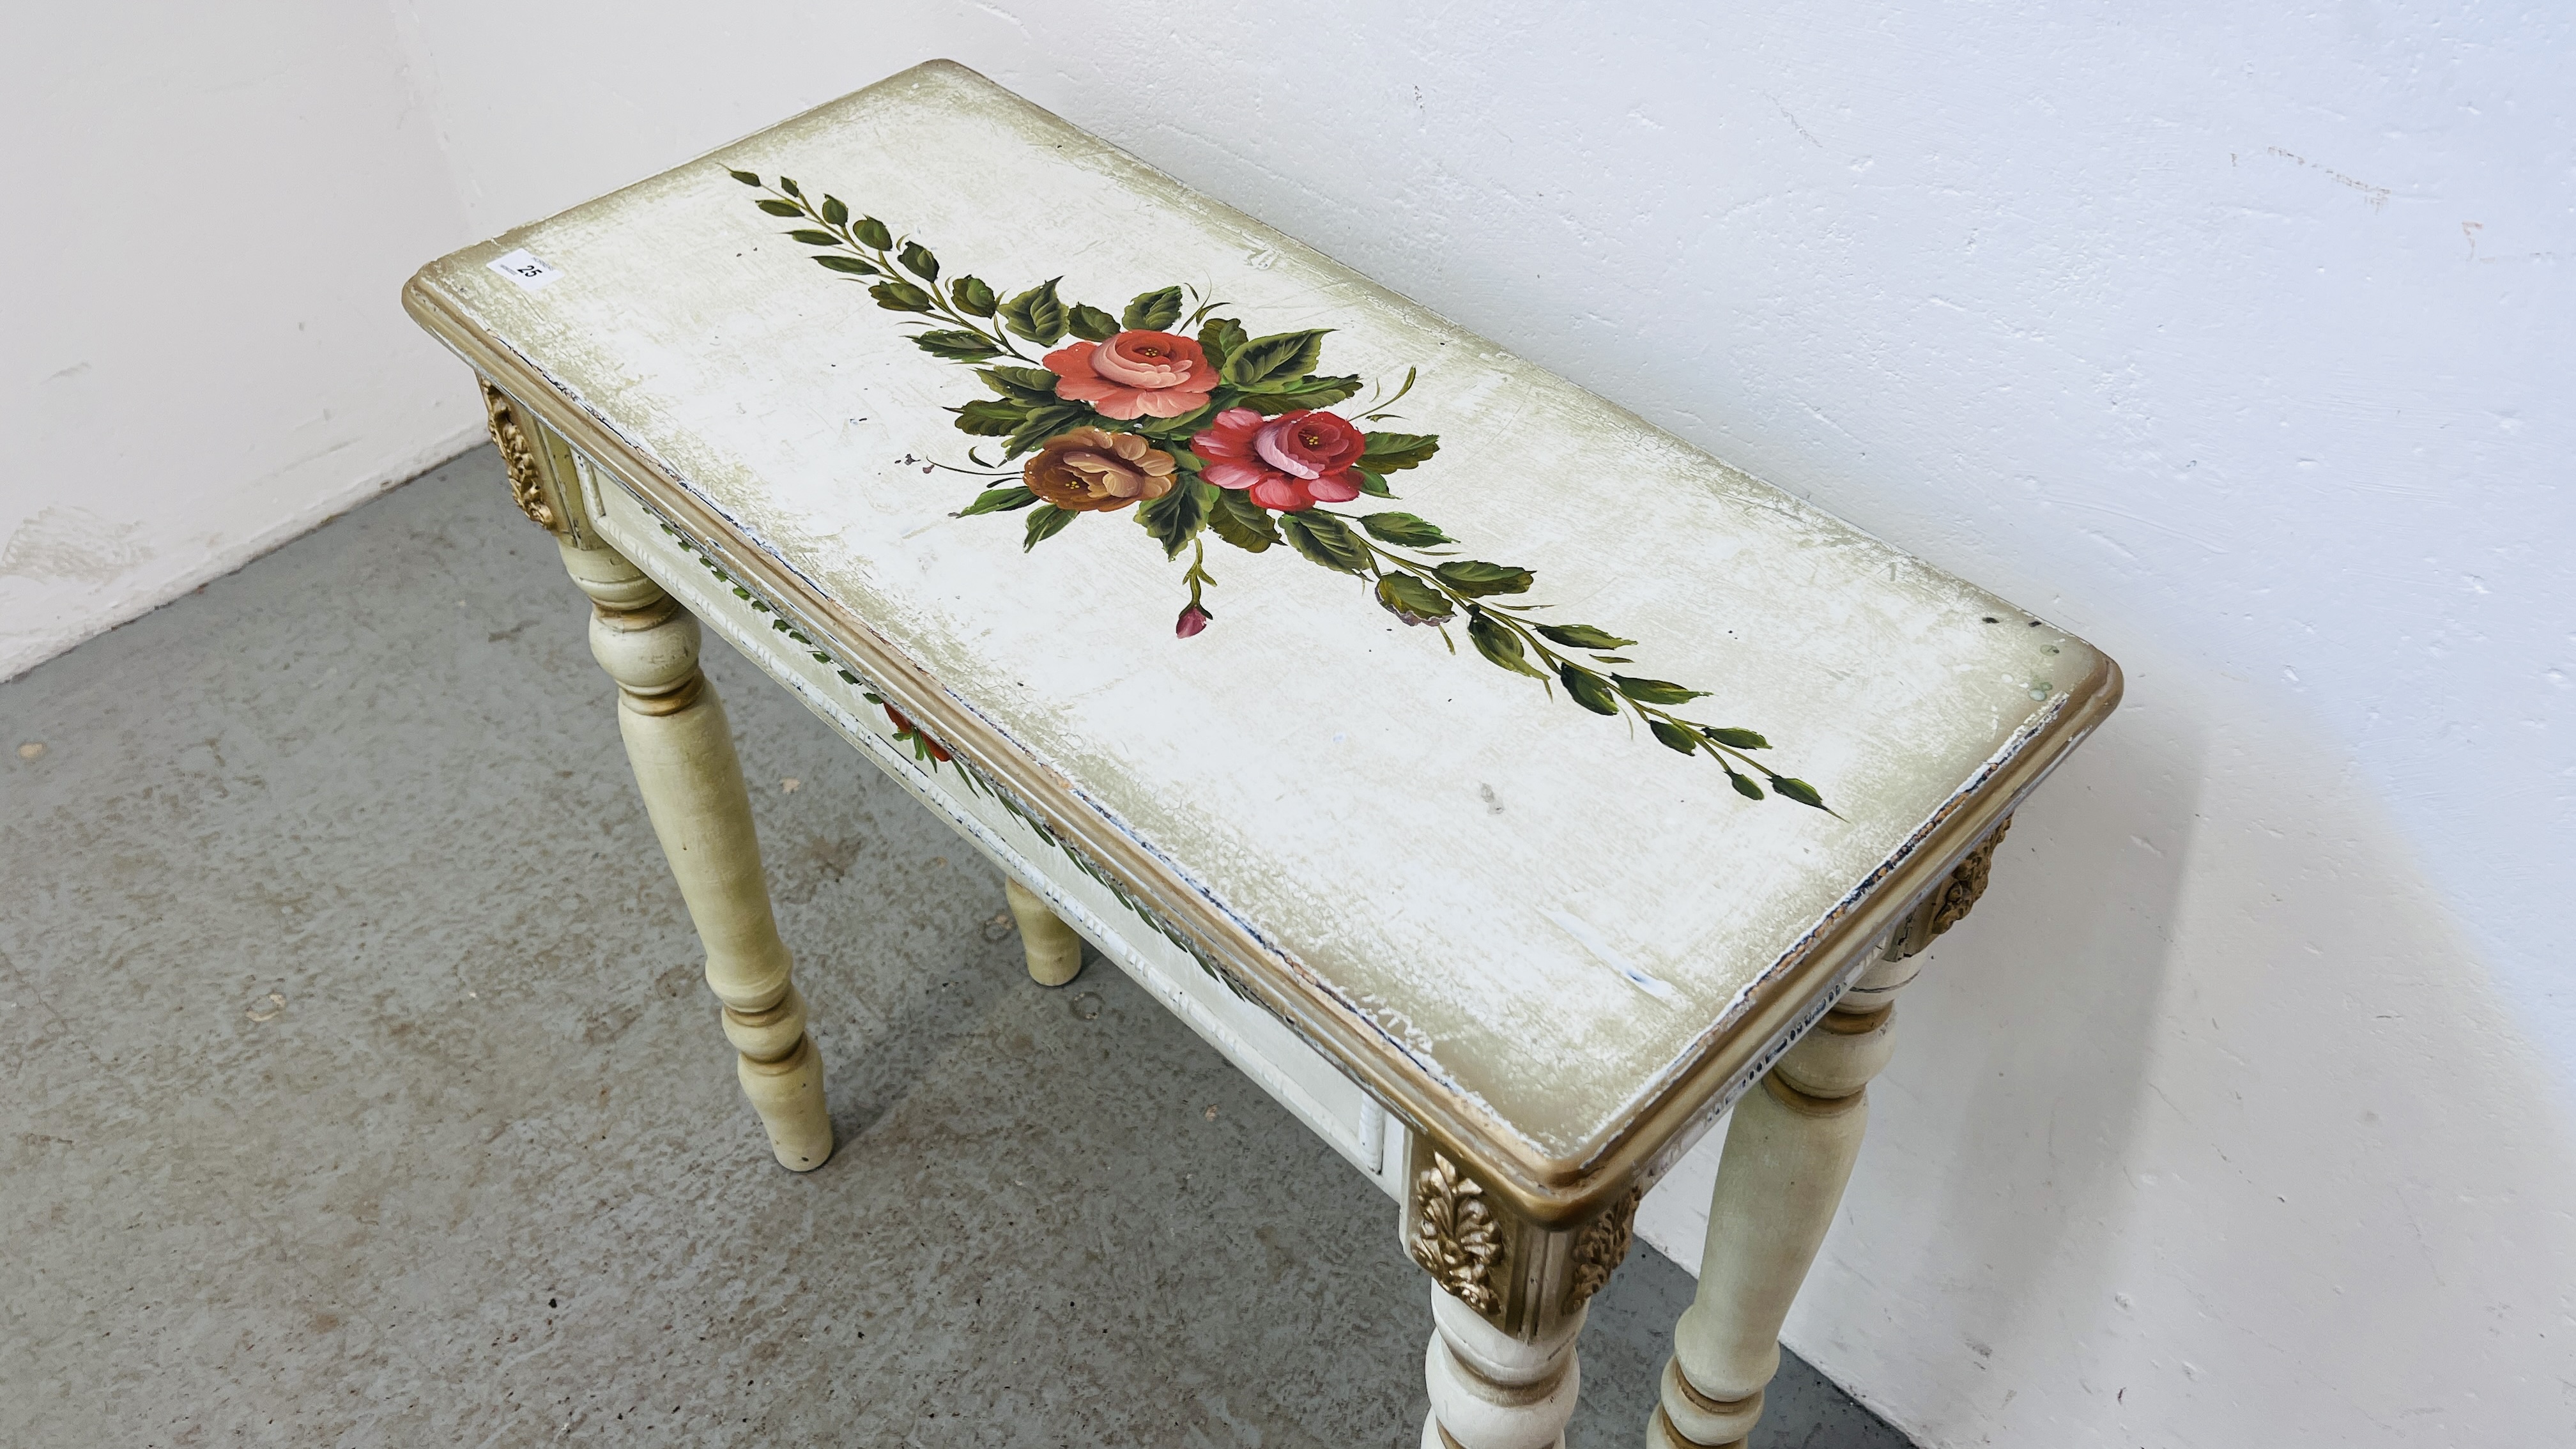 A SHABBY CHIC HALL TABLE WITH HAND PAINTED ROSE GARLAND DESIGN WIDTH 76CM. DEPTH 35CM. HEIGHT 77CM. - Image 3 of 5